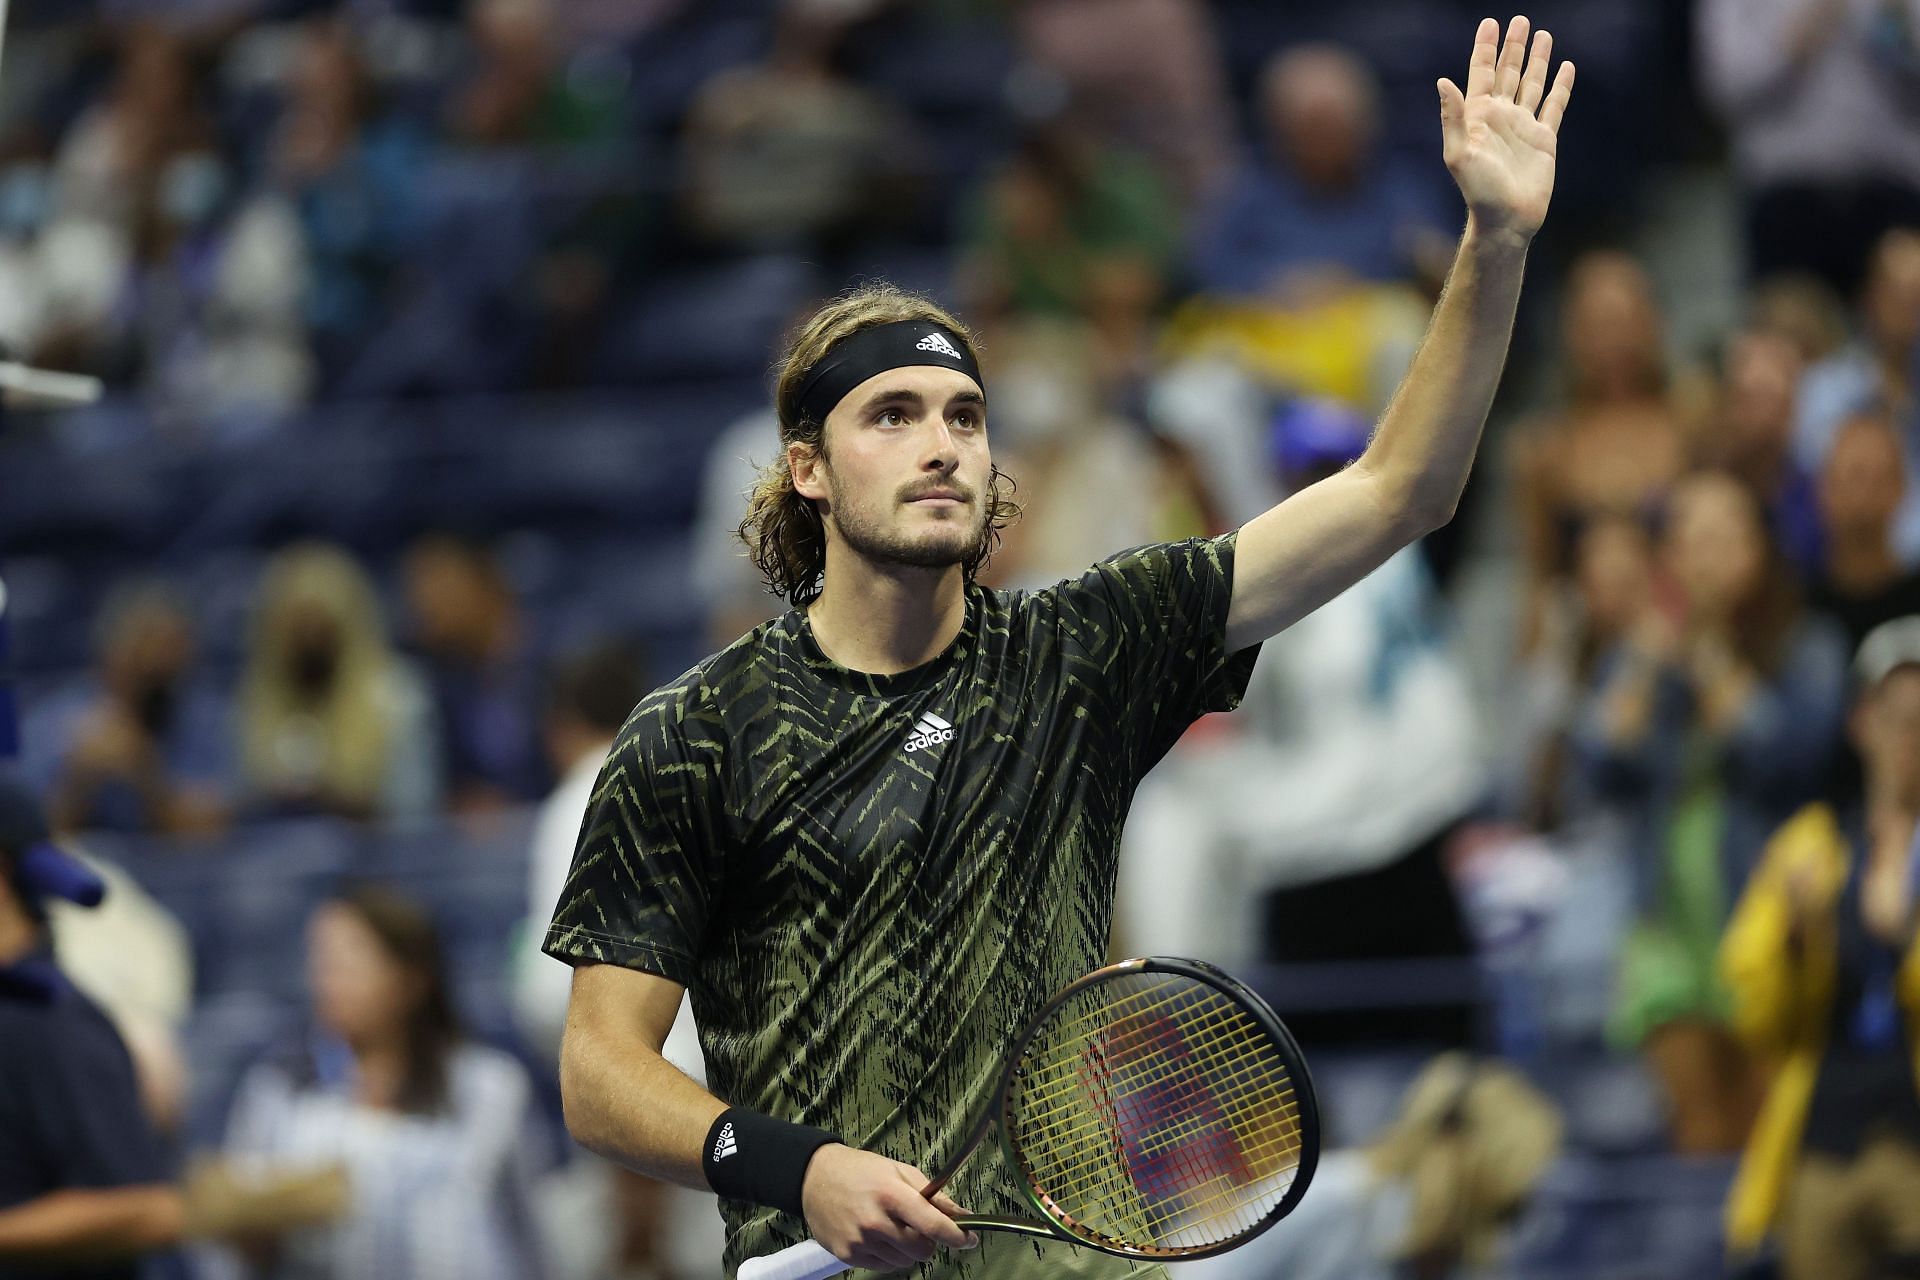 Stefanos Tsitsipas is currently ranked at No. 7 in the ATP rankings.